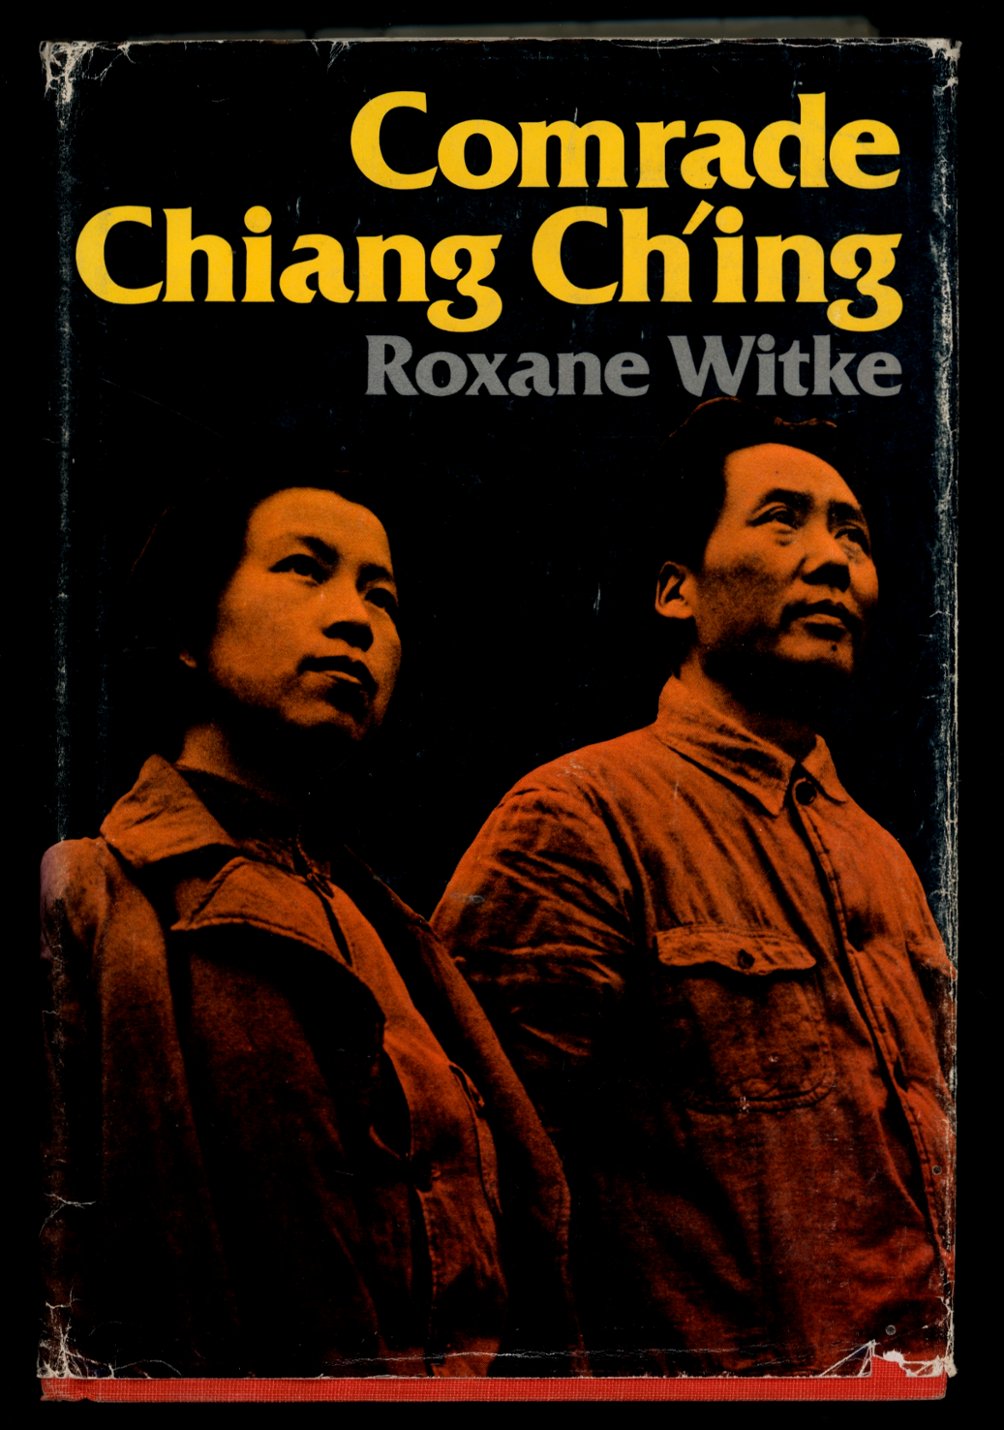 Comrade Chiang Ch'ing, by Roxane Witke, 1977, 549 pages, hardbound, black and white illustrations and maps, good condition, dust jacket very worn, (3 lb 8 oz)